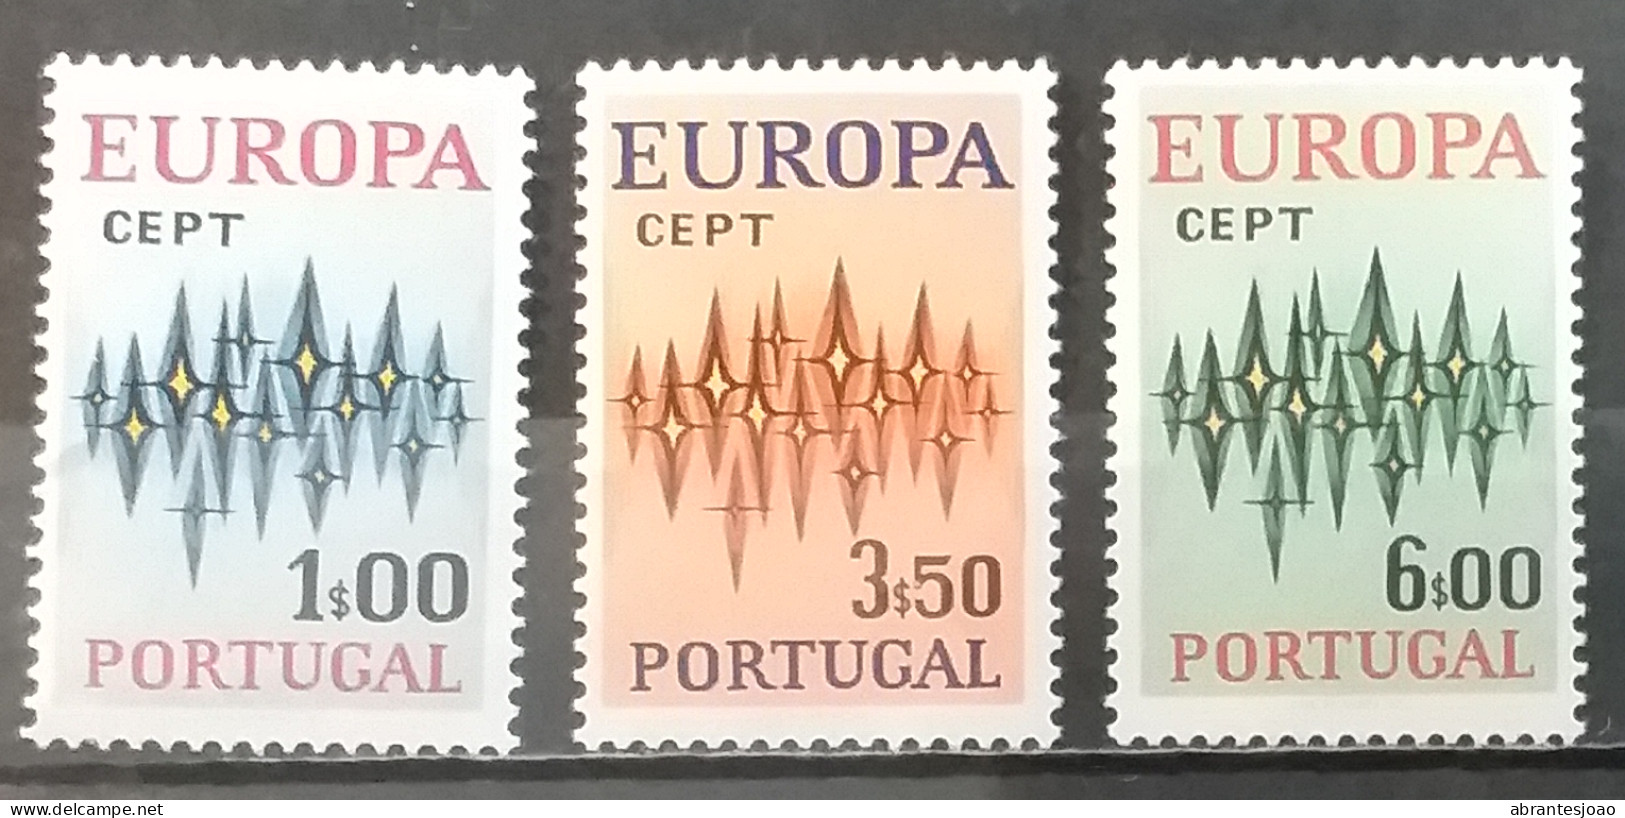 Portugal - Europa CEPT -1961+1963+1968+1971+1972 - MNH - 3+3+3+3+3 Stamps - SALE!!! - Nuevos